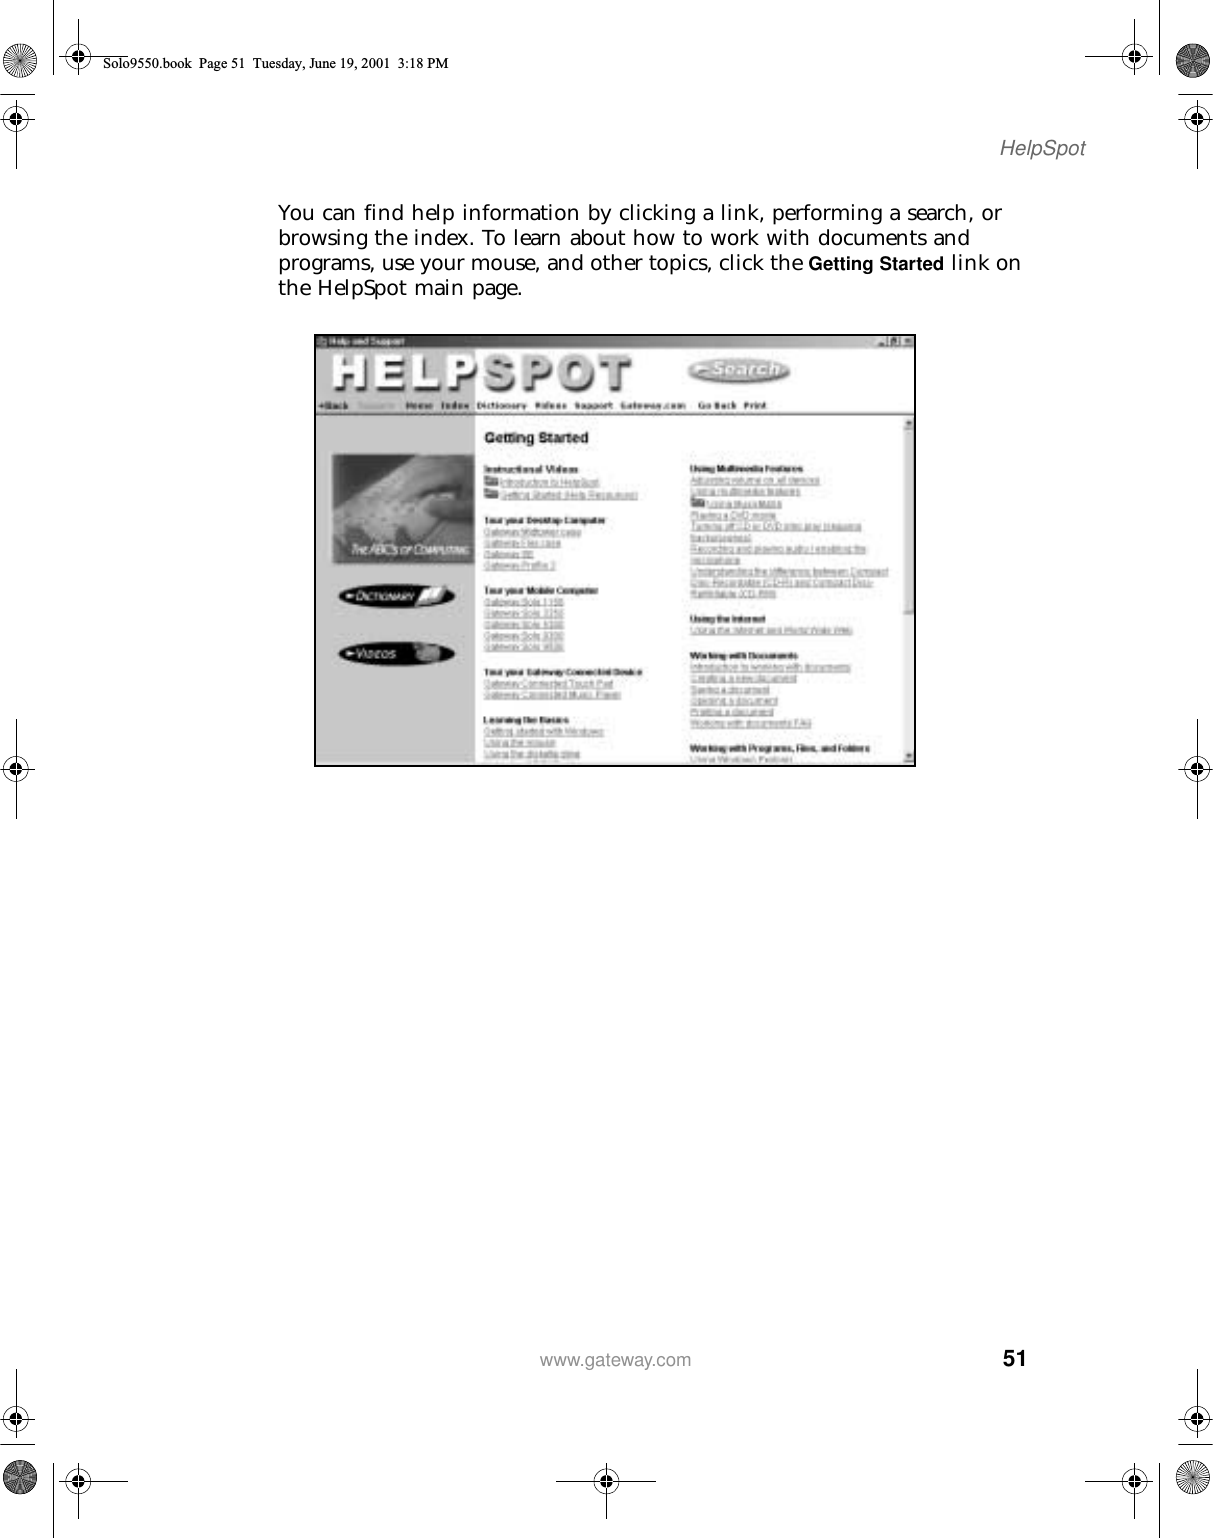 51HelpSpotwww.gateway.comYou can find help information by clicking a link, performing a search, or browsing the index. To learn about how to work with documents and programs, use your mouse, and other topics, click the Getting Started link on the HelpSpot main page.Solo9550.book Page 51 Tuesday, June 19, 2001 3:18 PM